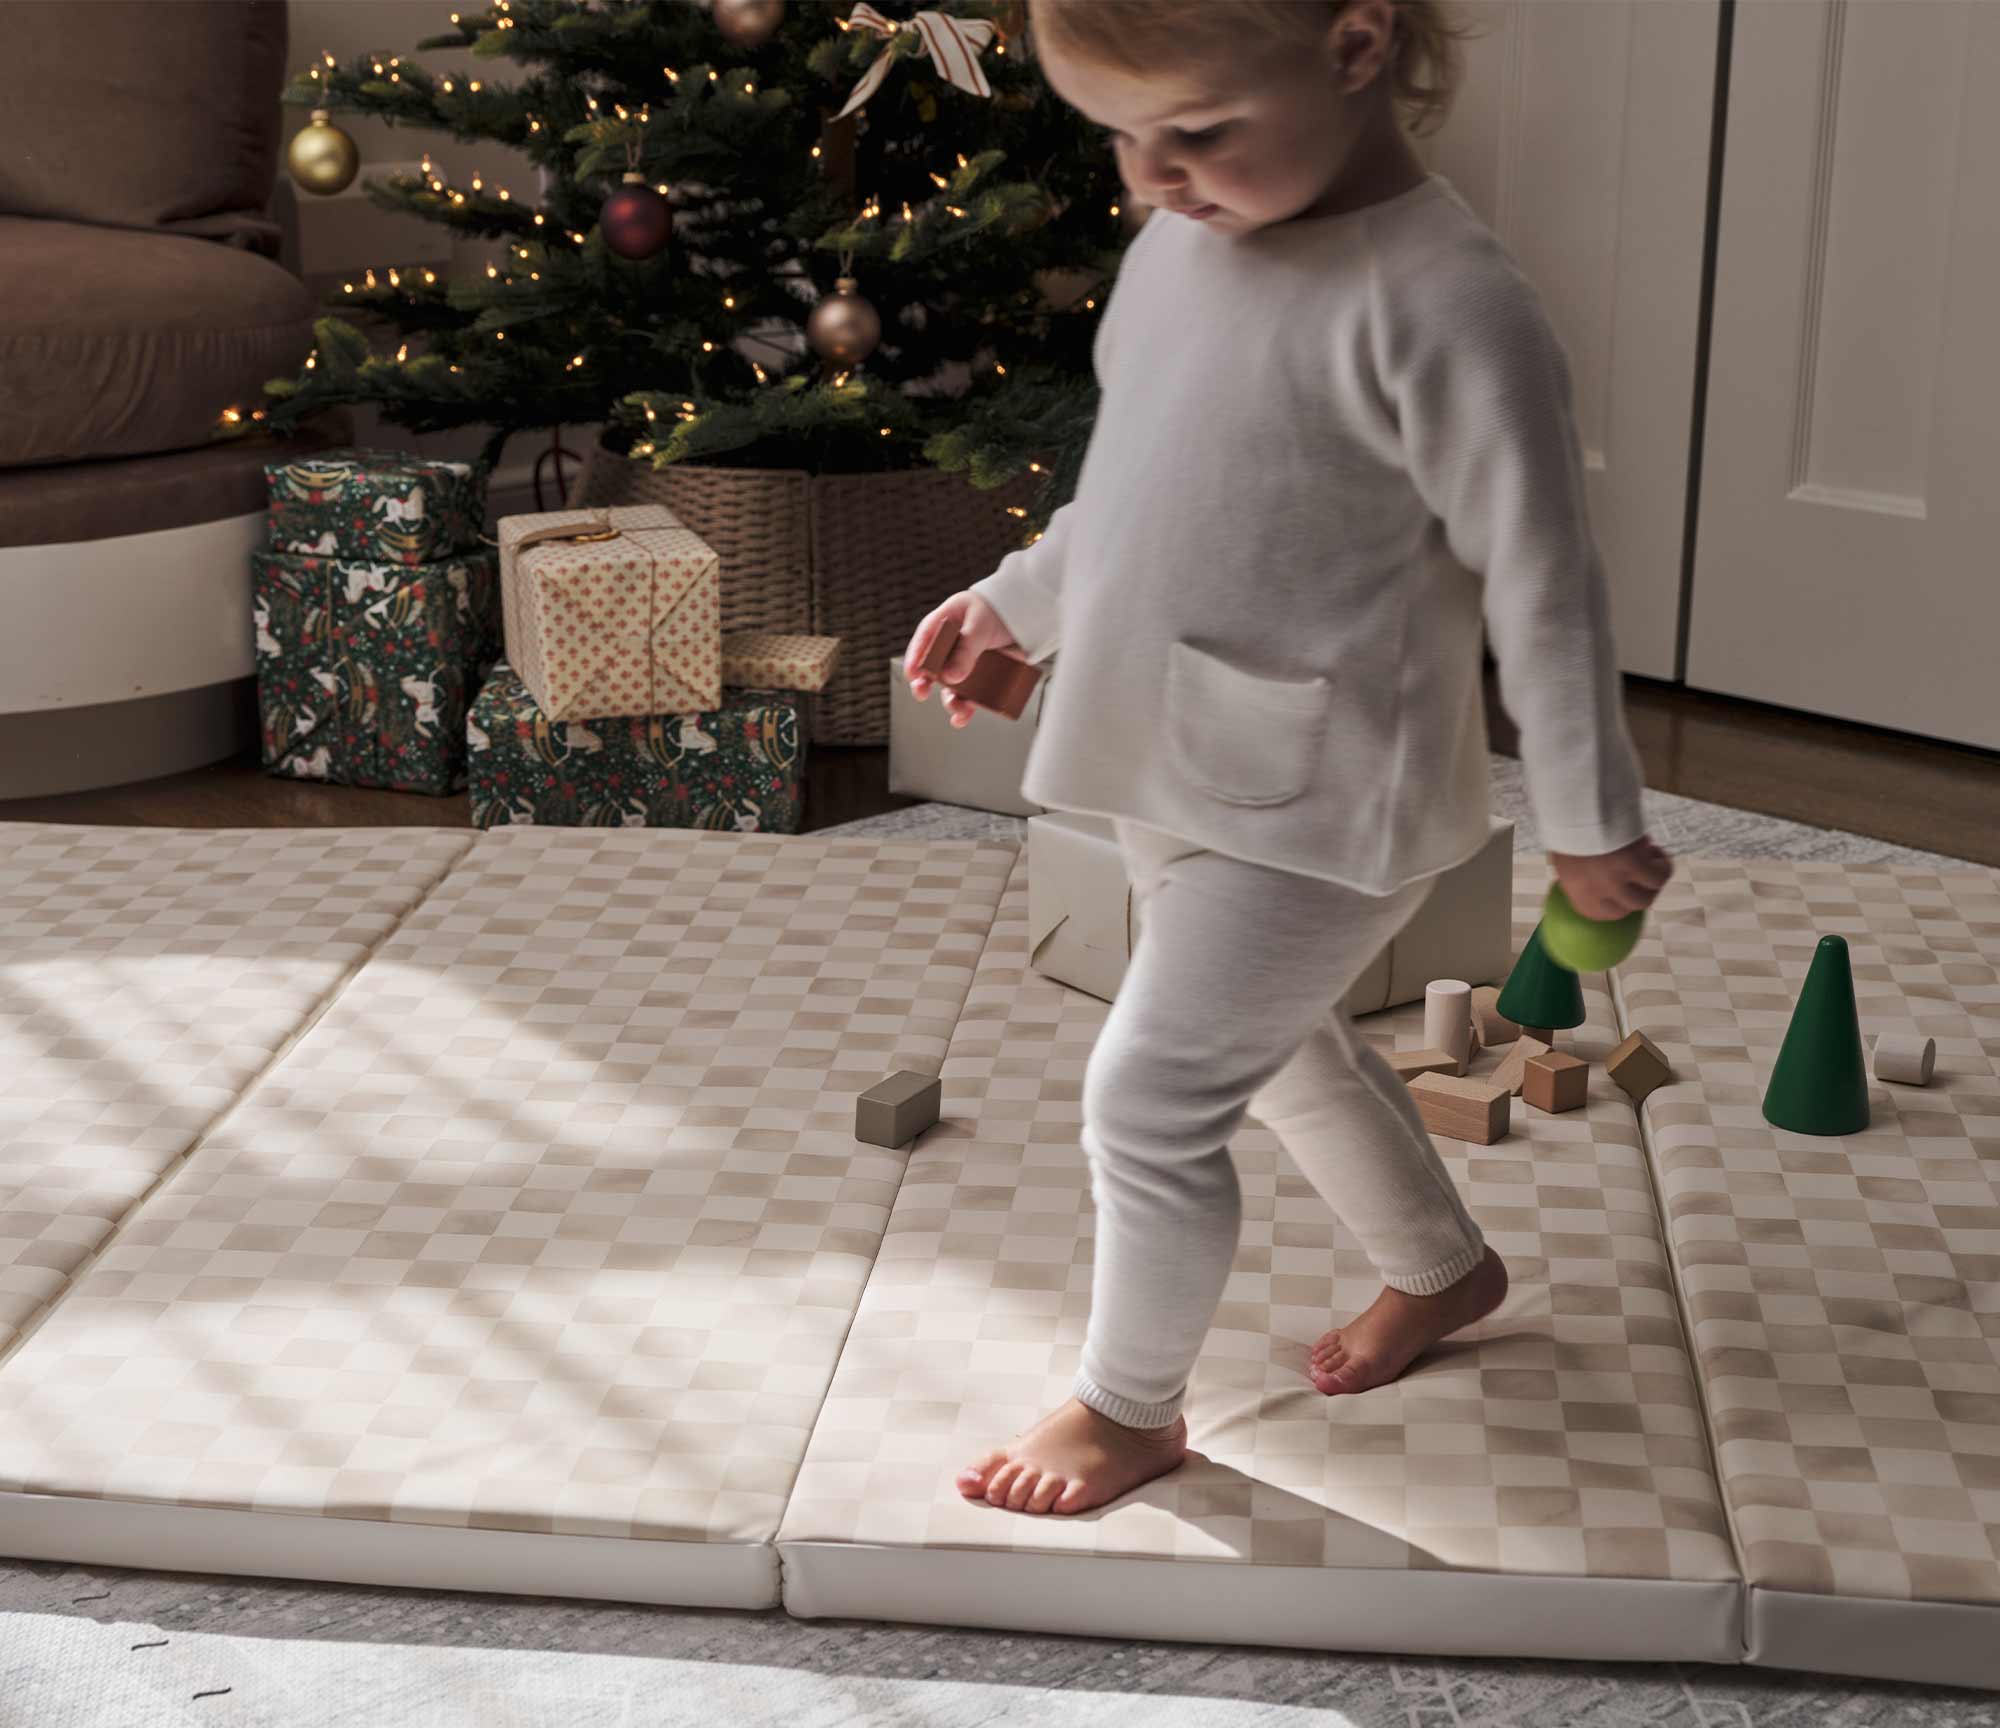 Checker Almond cream and brown geometric print tumbling mat shown with toddler walking across the mat with wooden blocks scattered